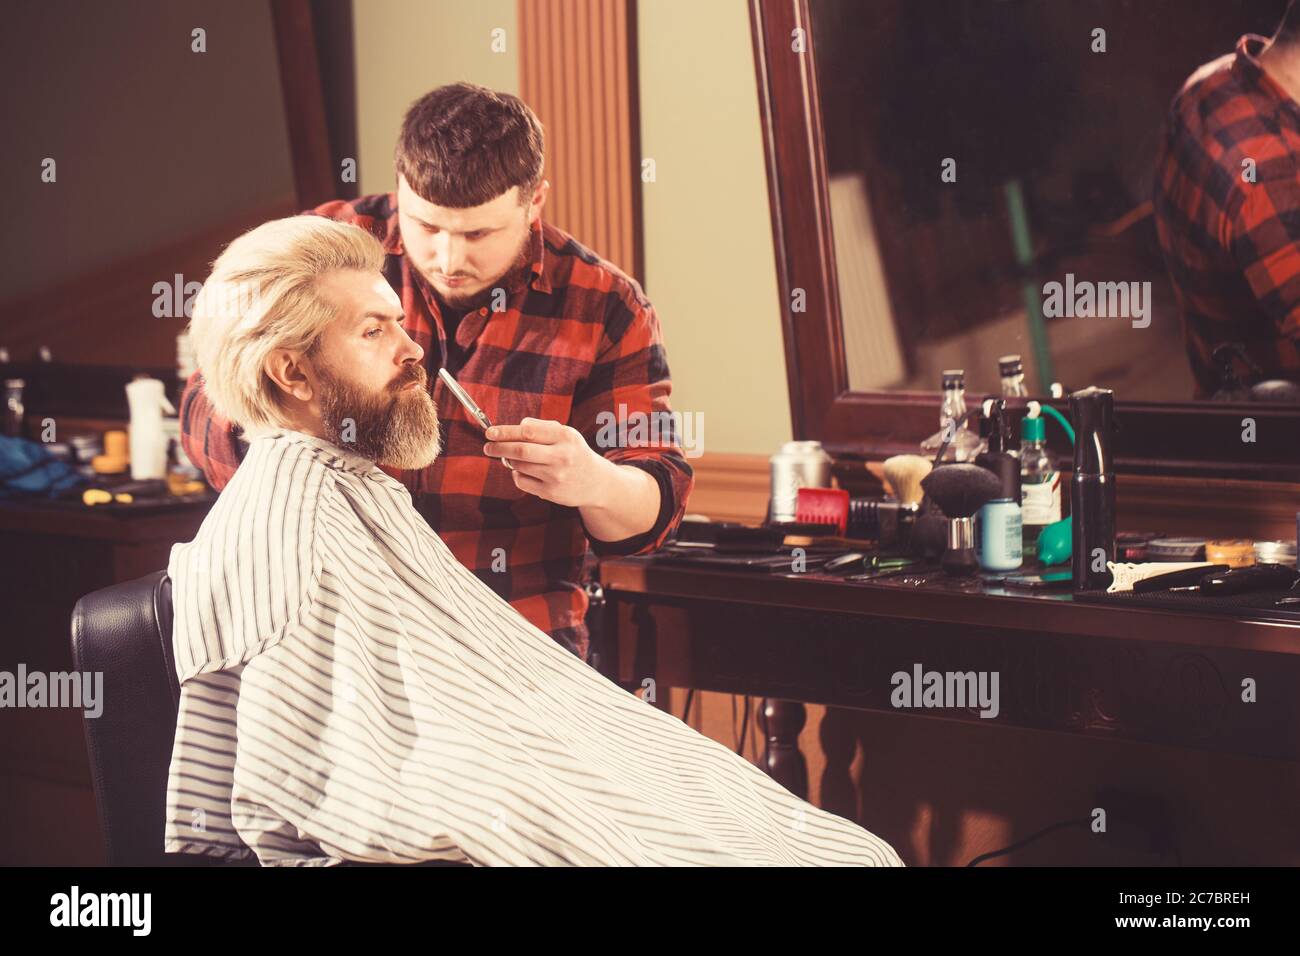 Blond brutal man having a haircut at hair salon. Hairdresser's hands making hairstyle. Stock Photo